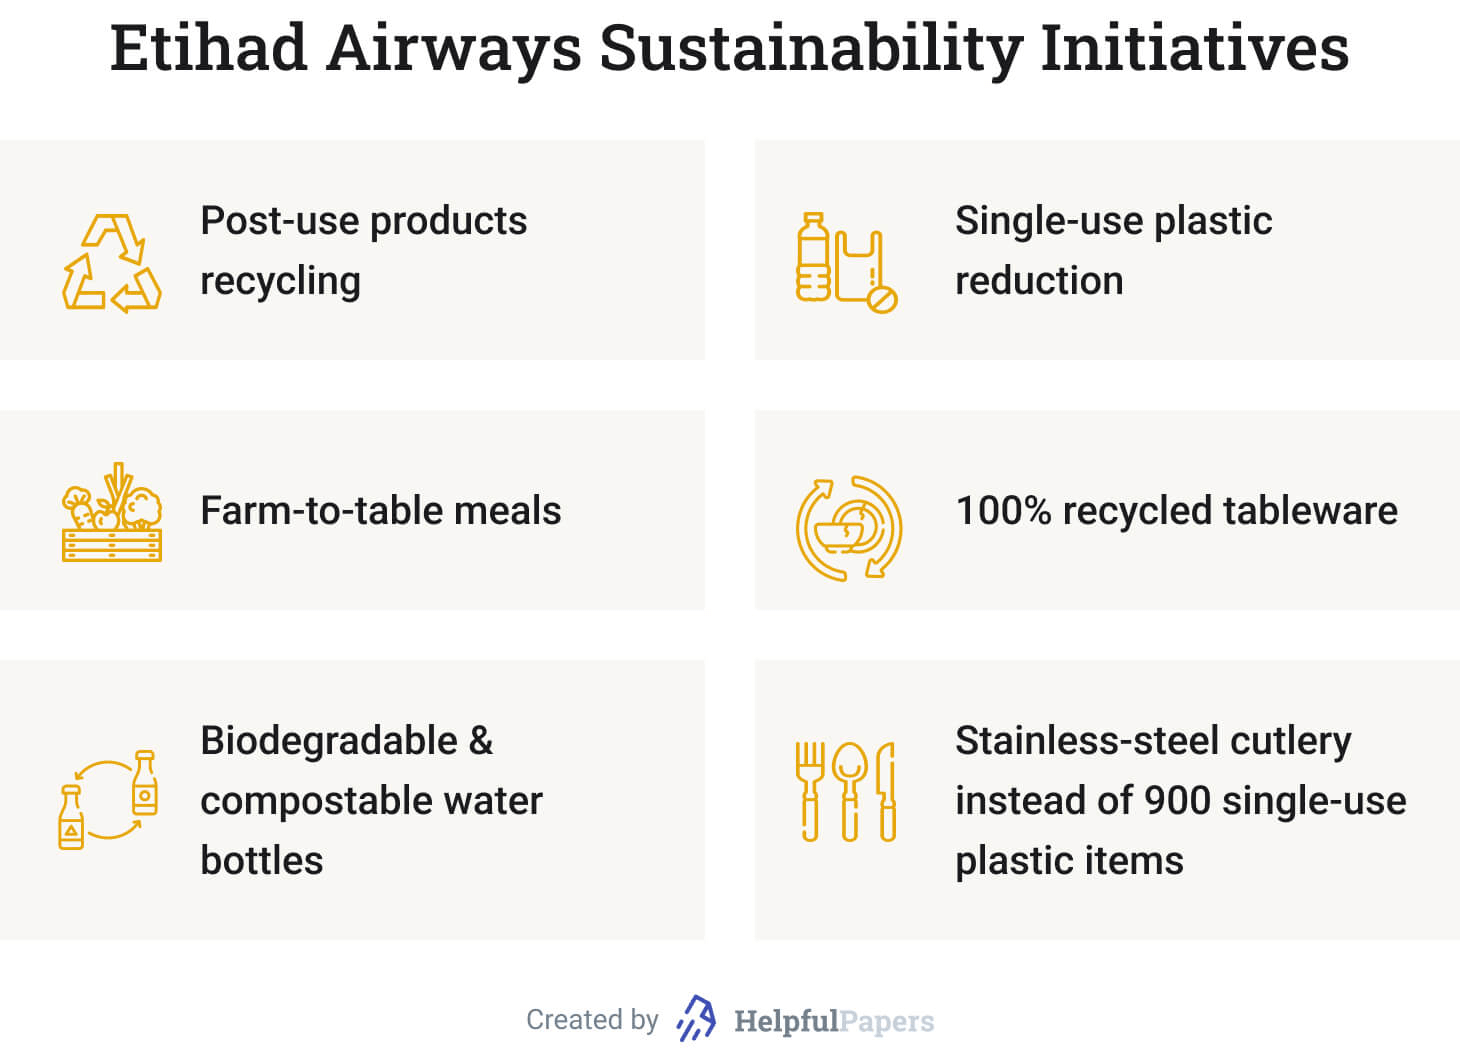 The picture shows examples of Etihad Airways' sustainability initiatives.